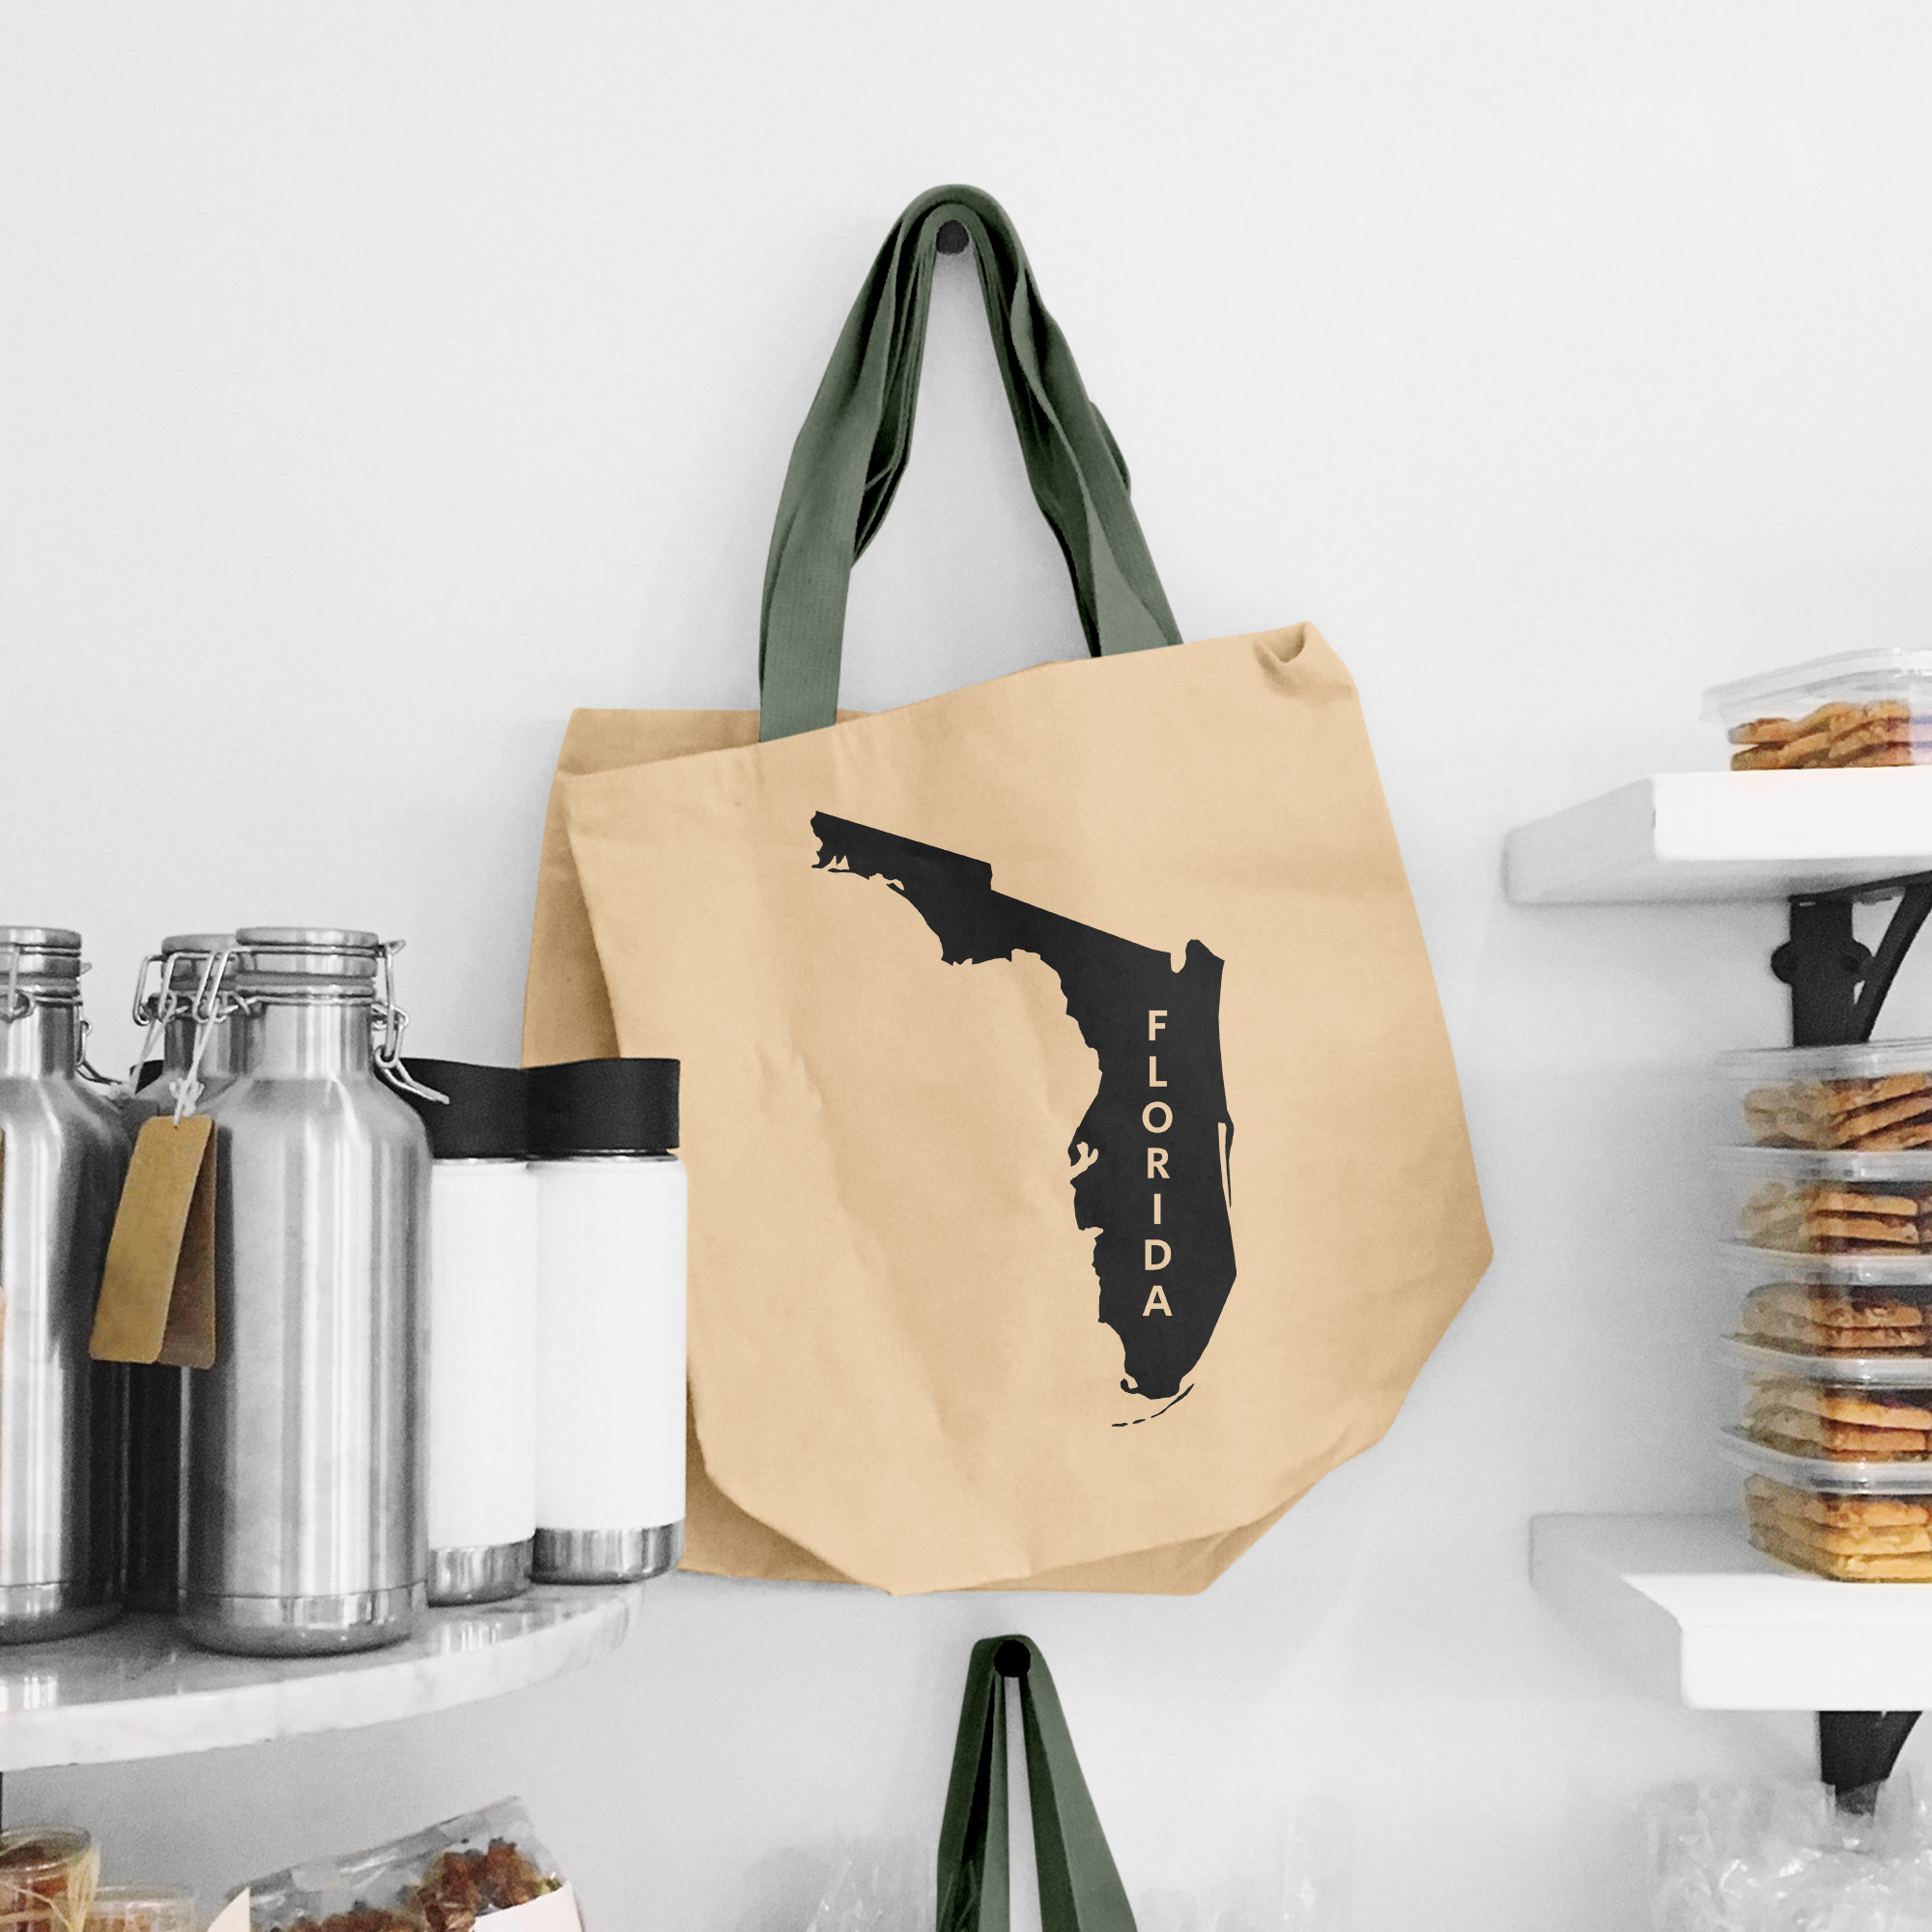 Black illustration of map of Florida and lettering "Florida" on the beige shopping bag with dirty green handle.